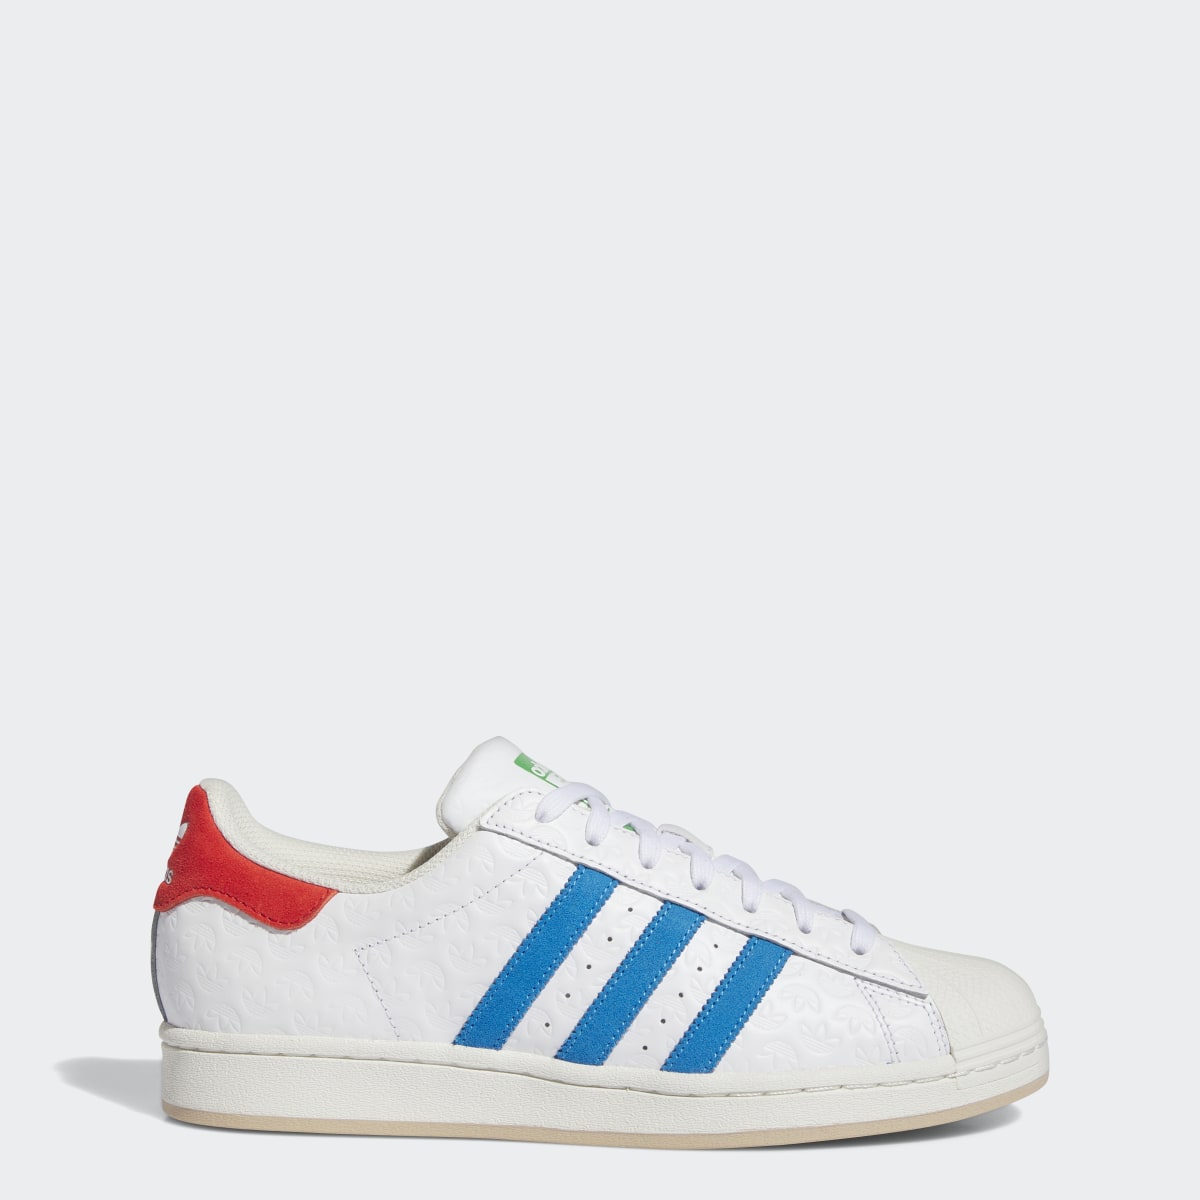 Adidas Superstar Shoes - ID7964